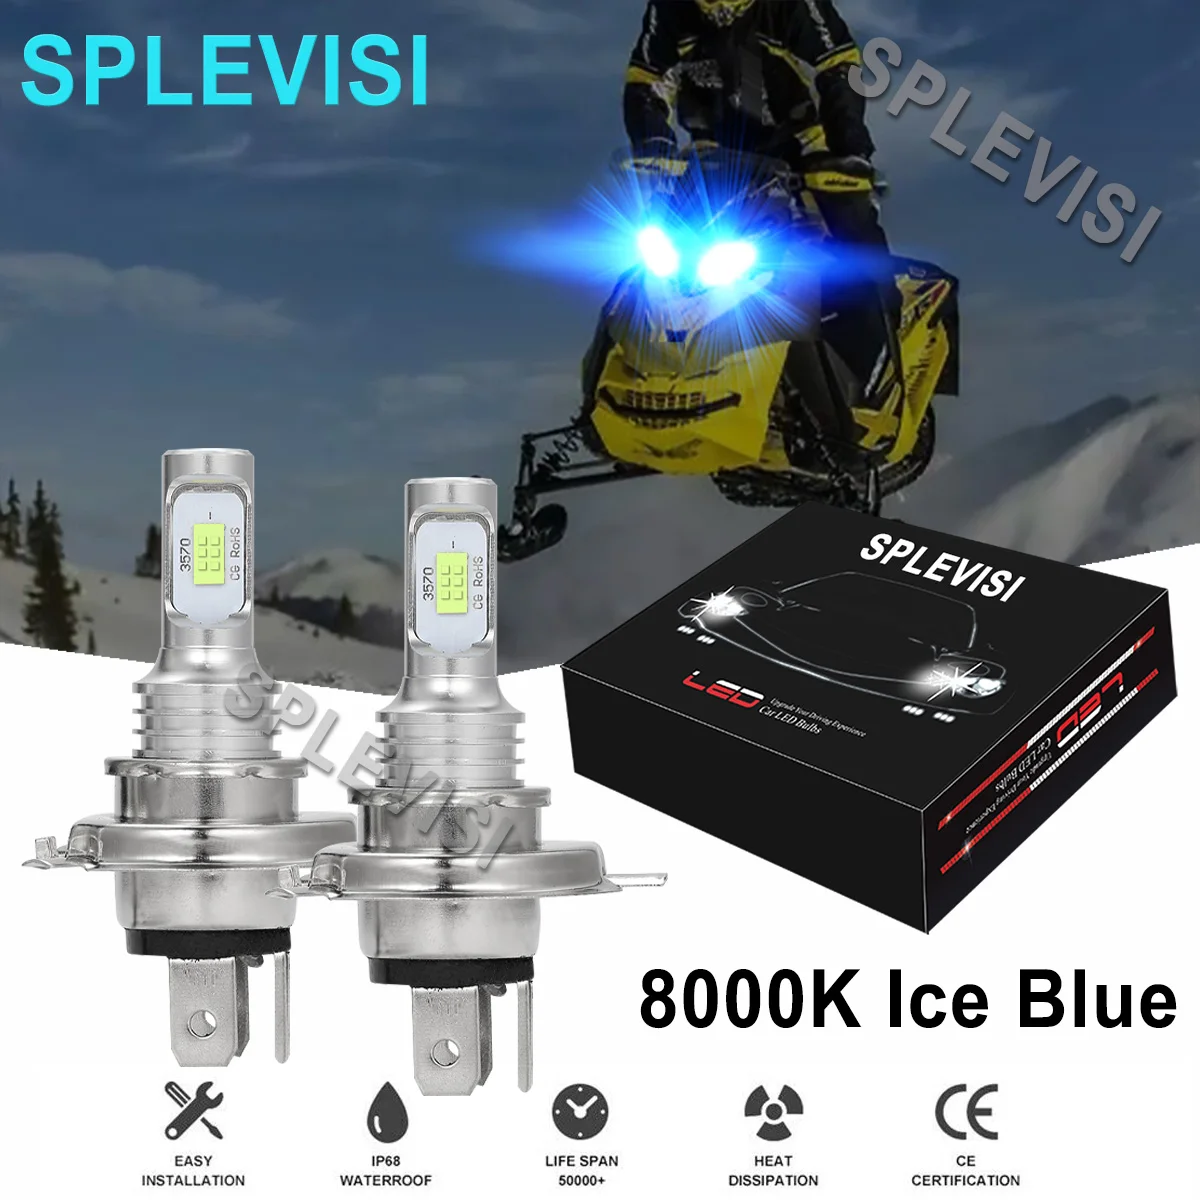 2x 70W Ice blue LED Headlights For Skidoo Touring 1994-2020 Backcountry 850 Etec 2018 2019 Expedition 2005-2019 Tundra 1993-2019